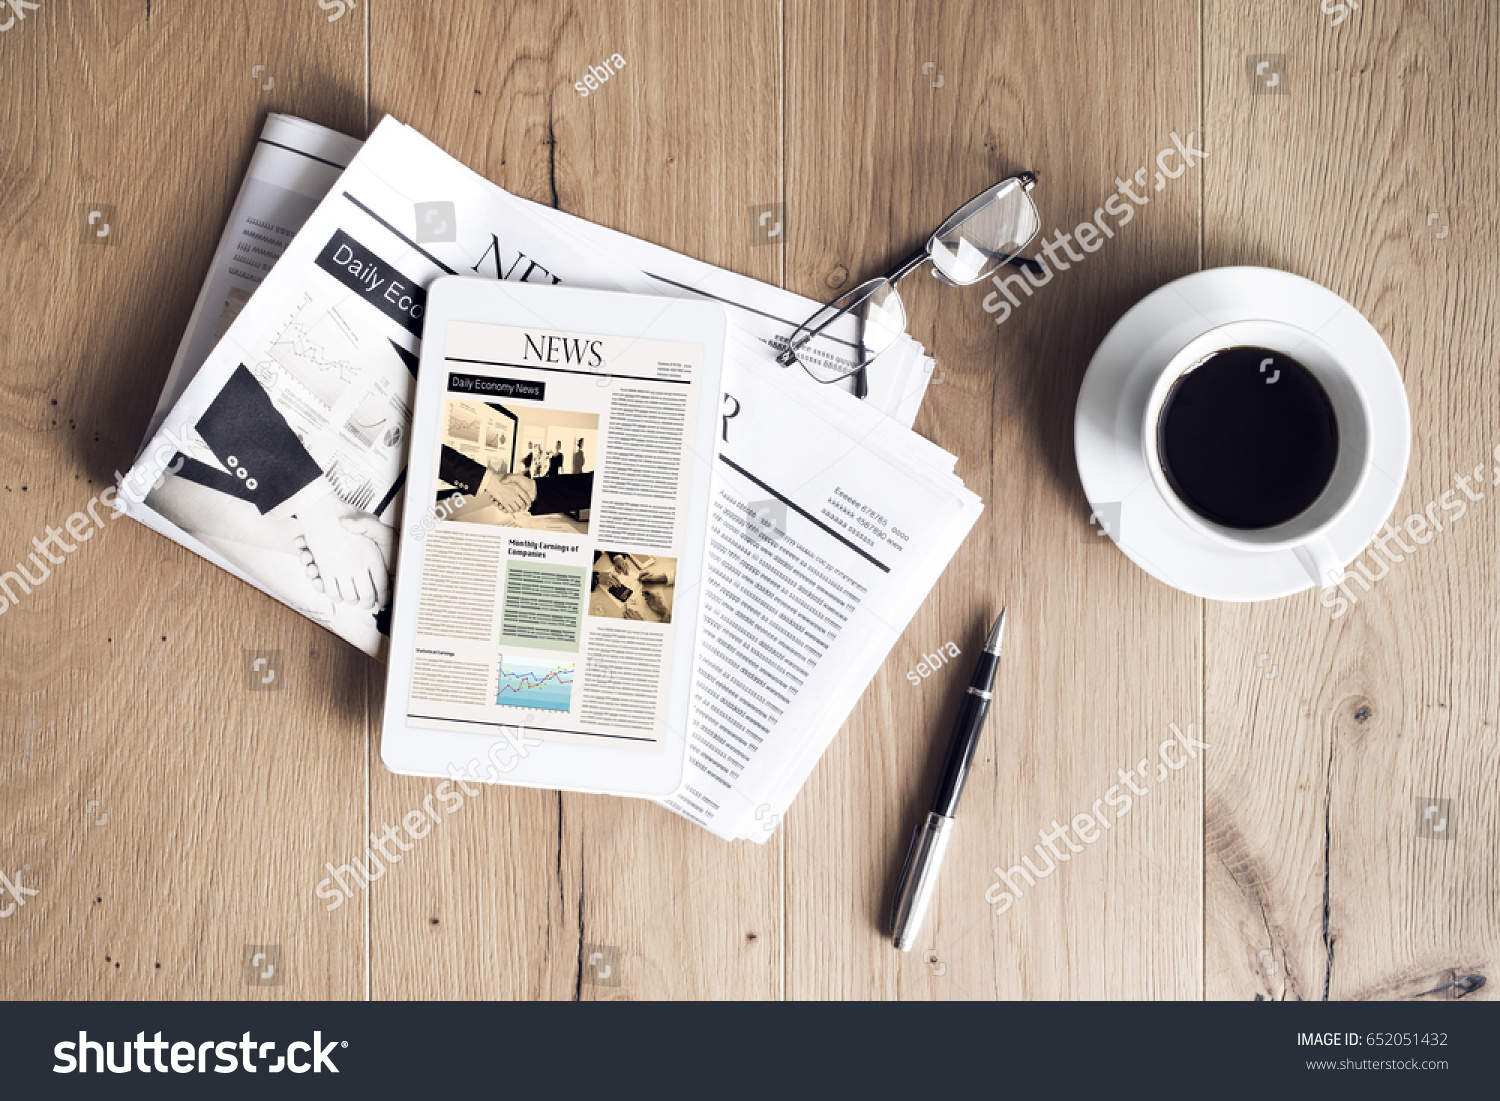 Newspaper with tablet on wooden table #652051432